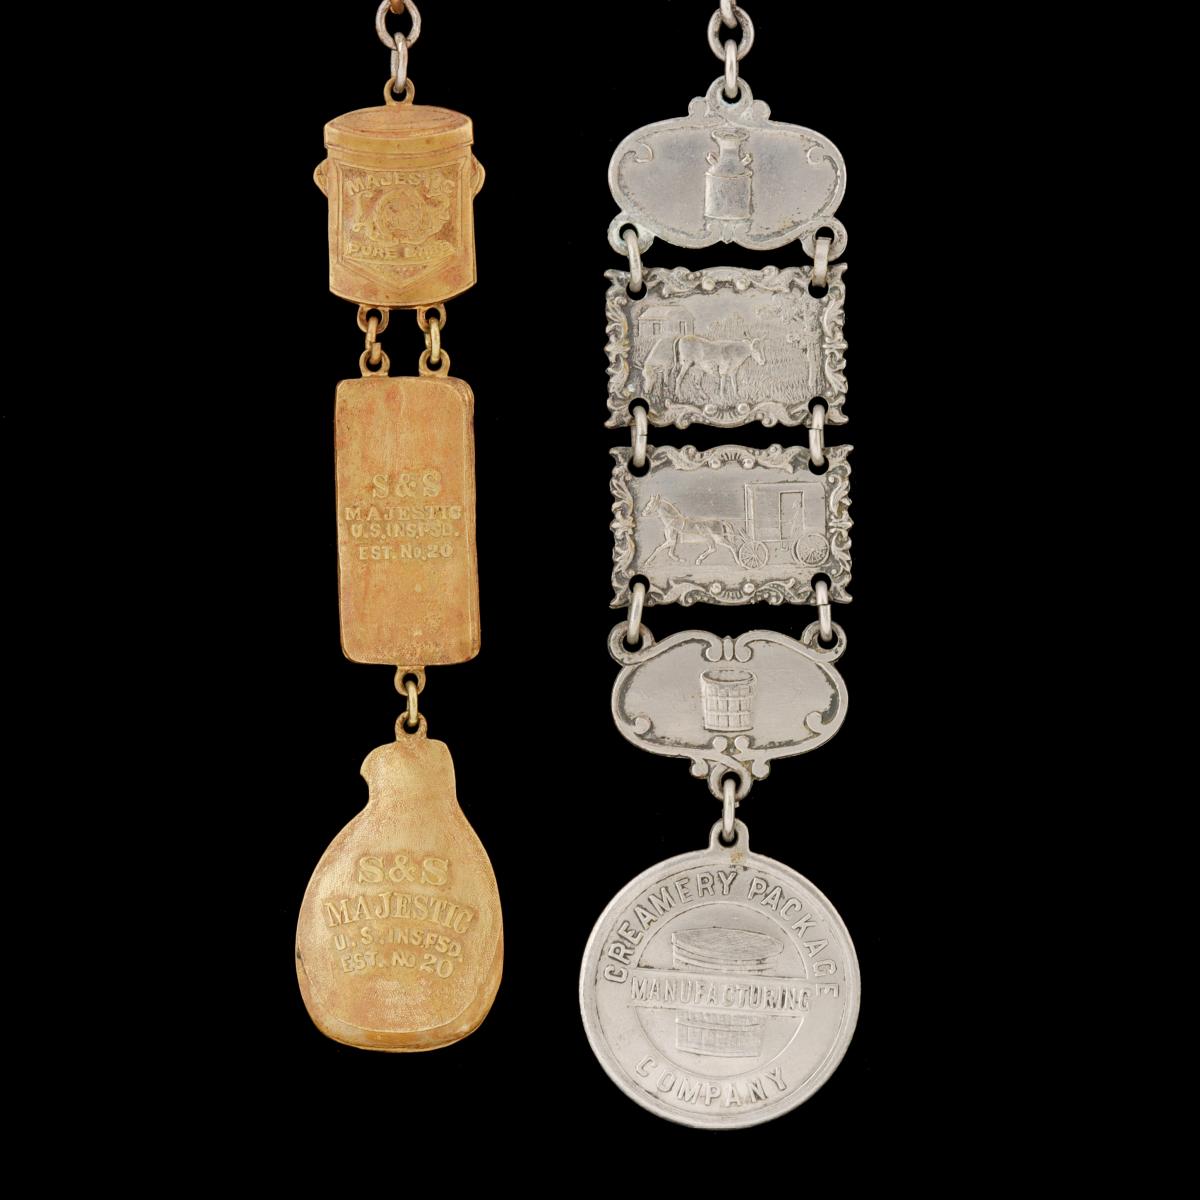 KC HAM AND DAIRY COMPANY ADVERTISING WATCH FOBS C. 1910